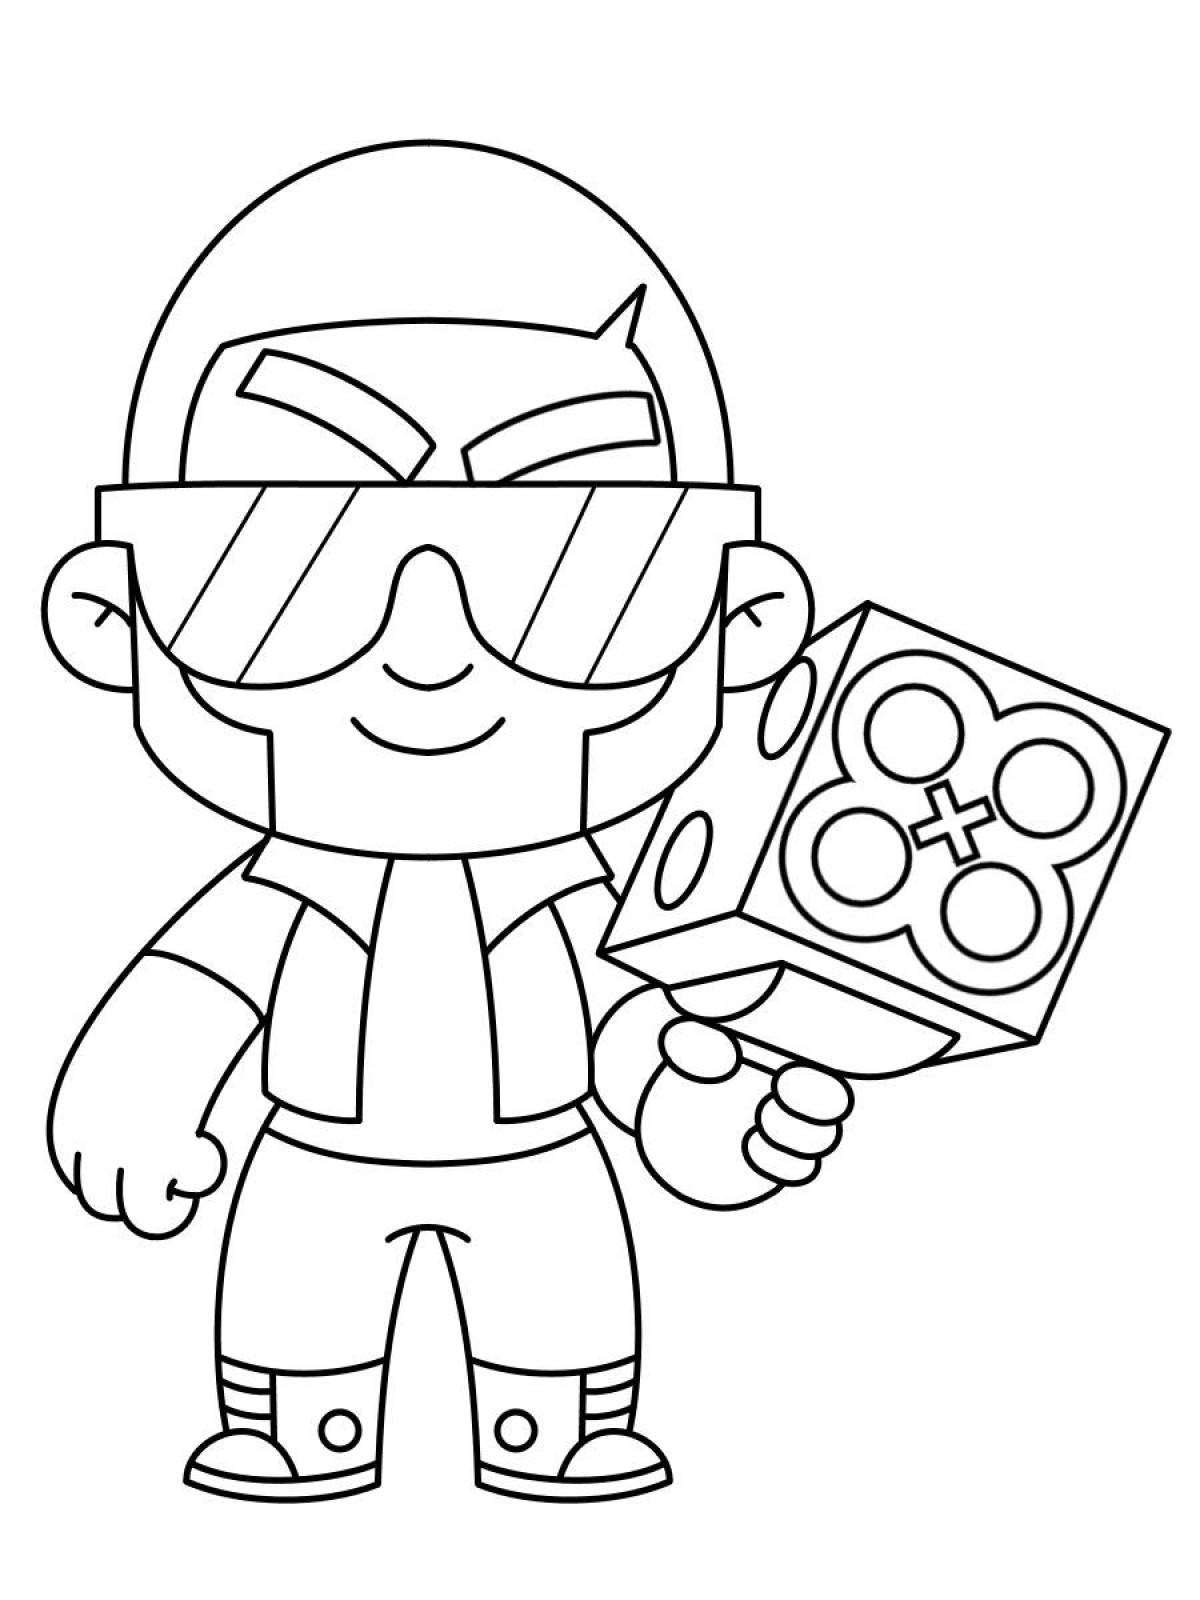 Amazing bravo stars coloring pages for boys